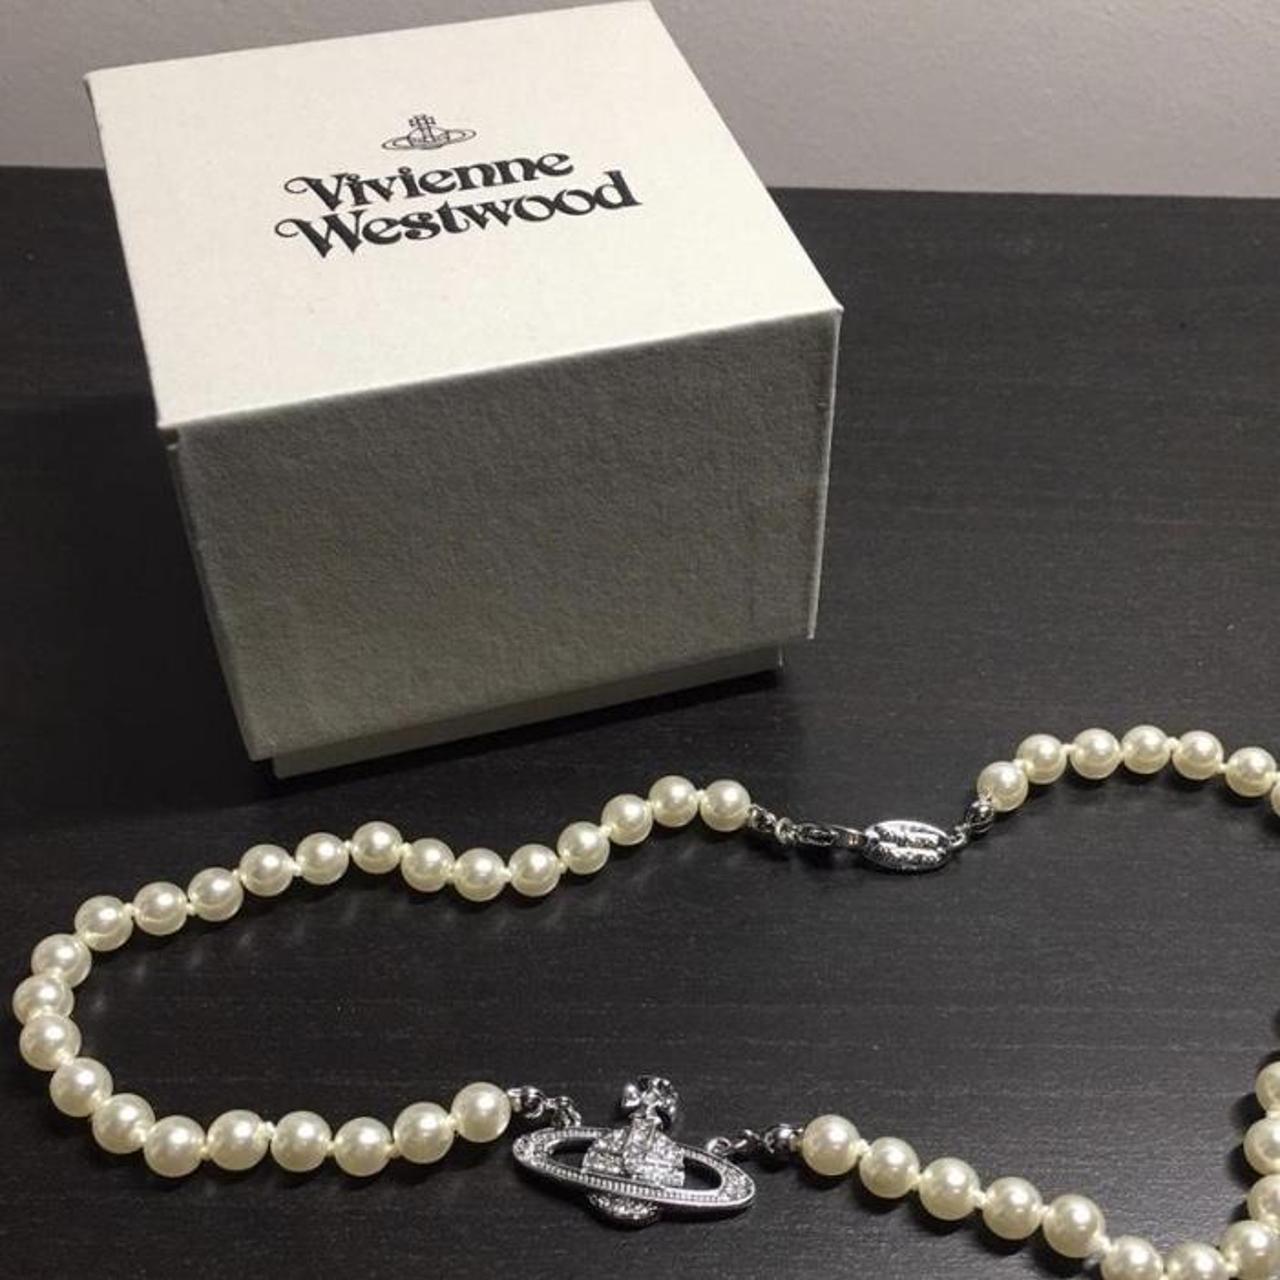 Real Vivienne Westwood Pearl Necklace Only worn a... - Depop